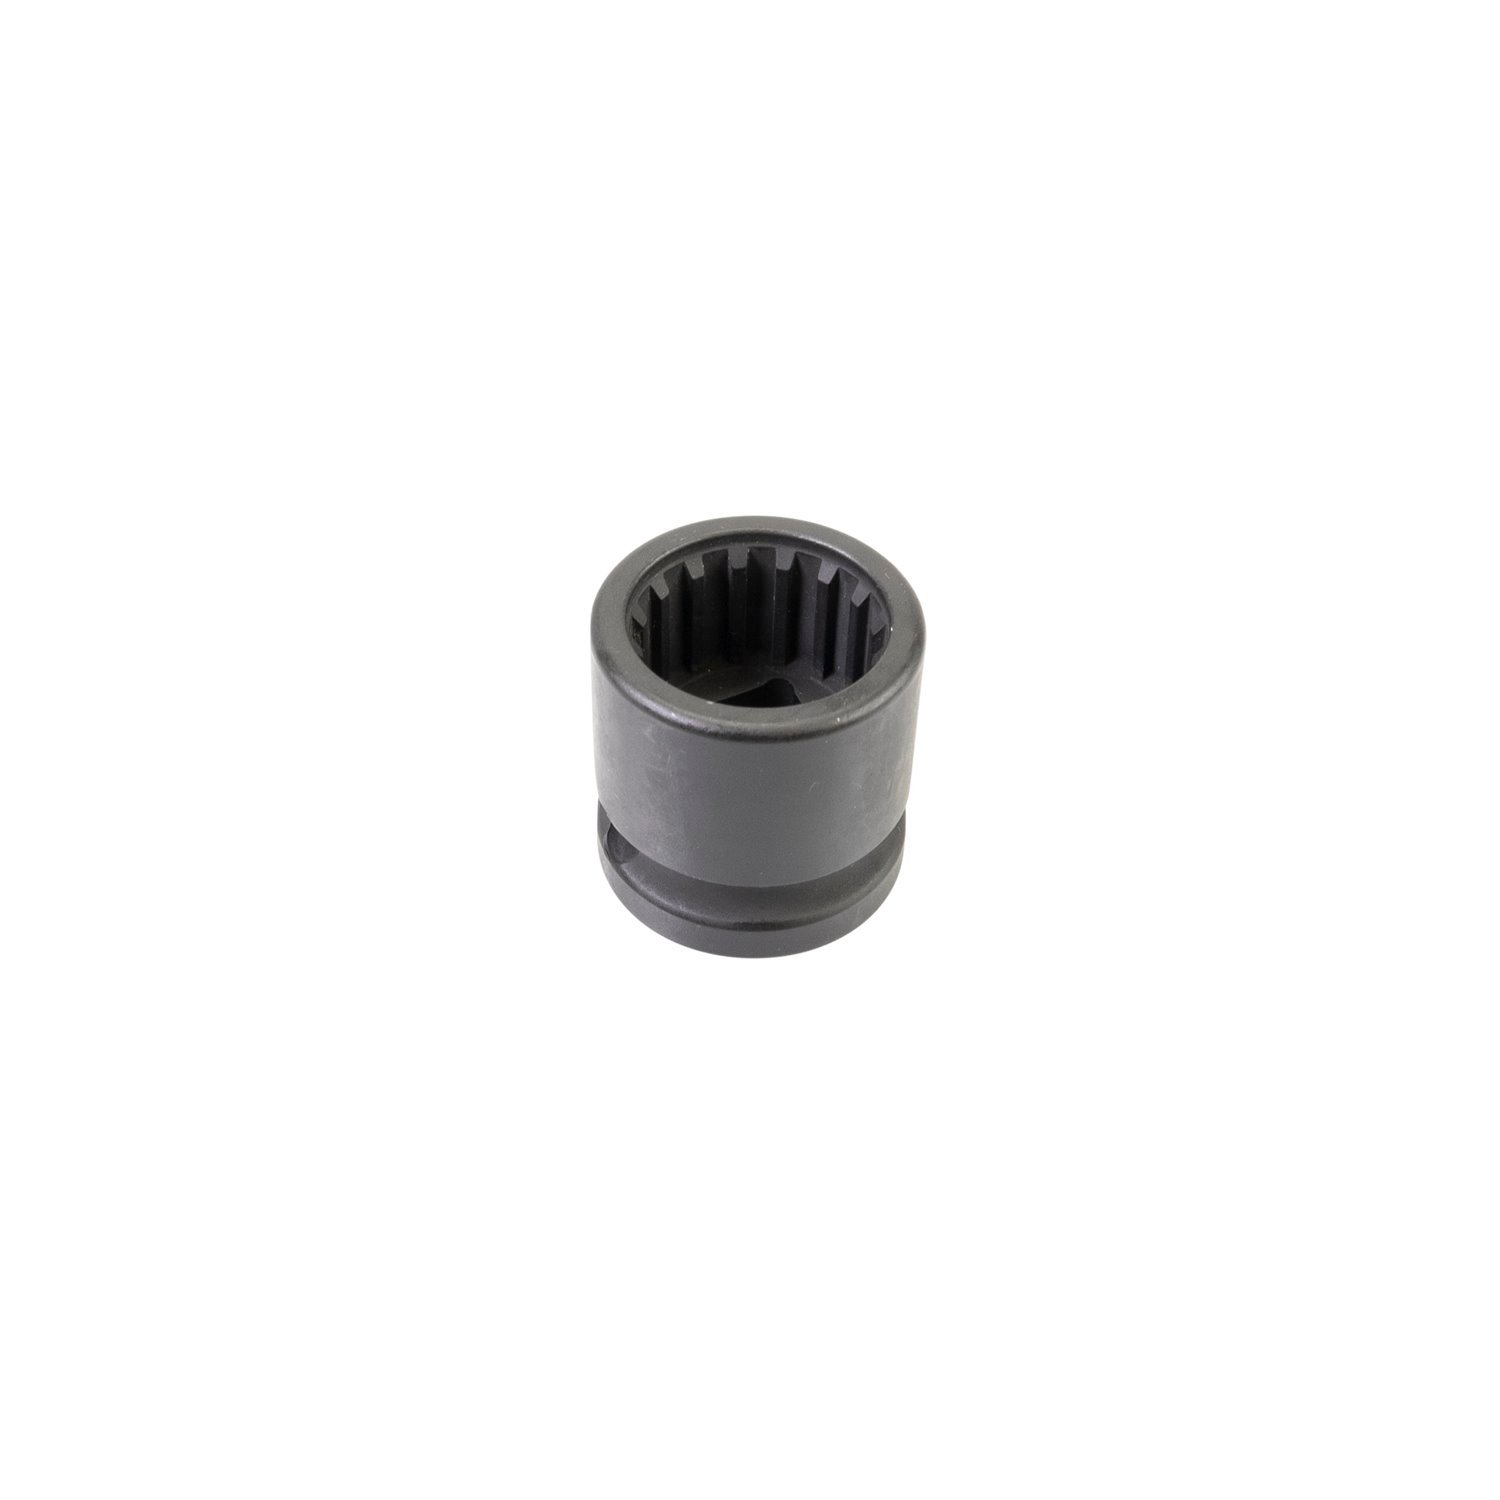 5475 Cam Phaser Socket Tool for Ford 7.3L Godzilla Engines